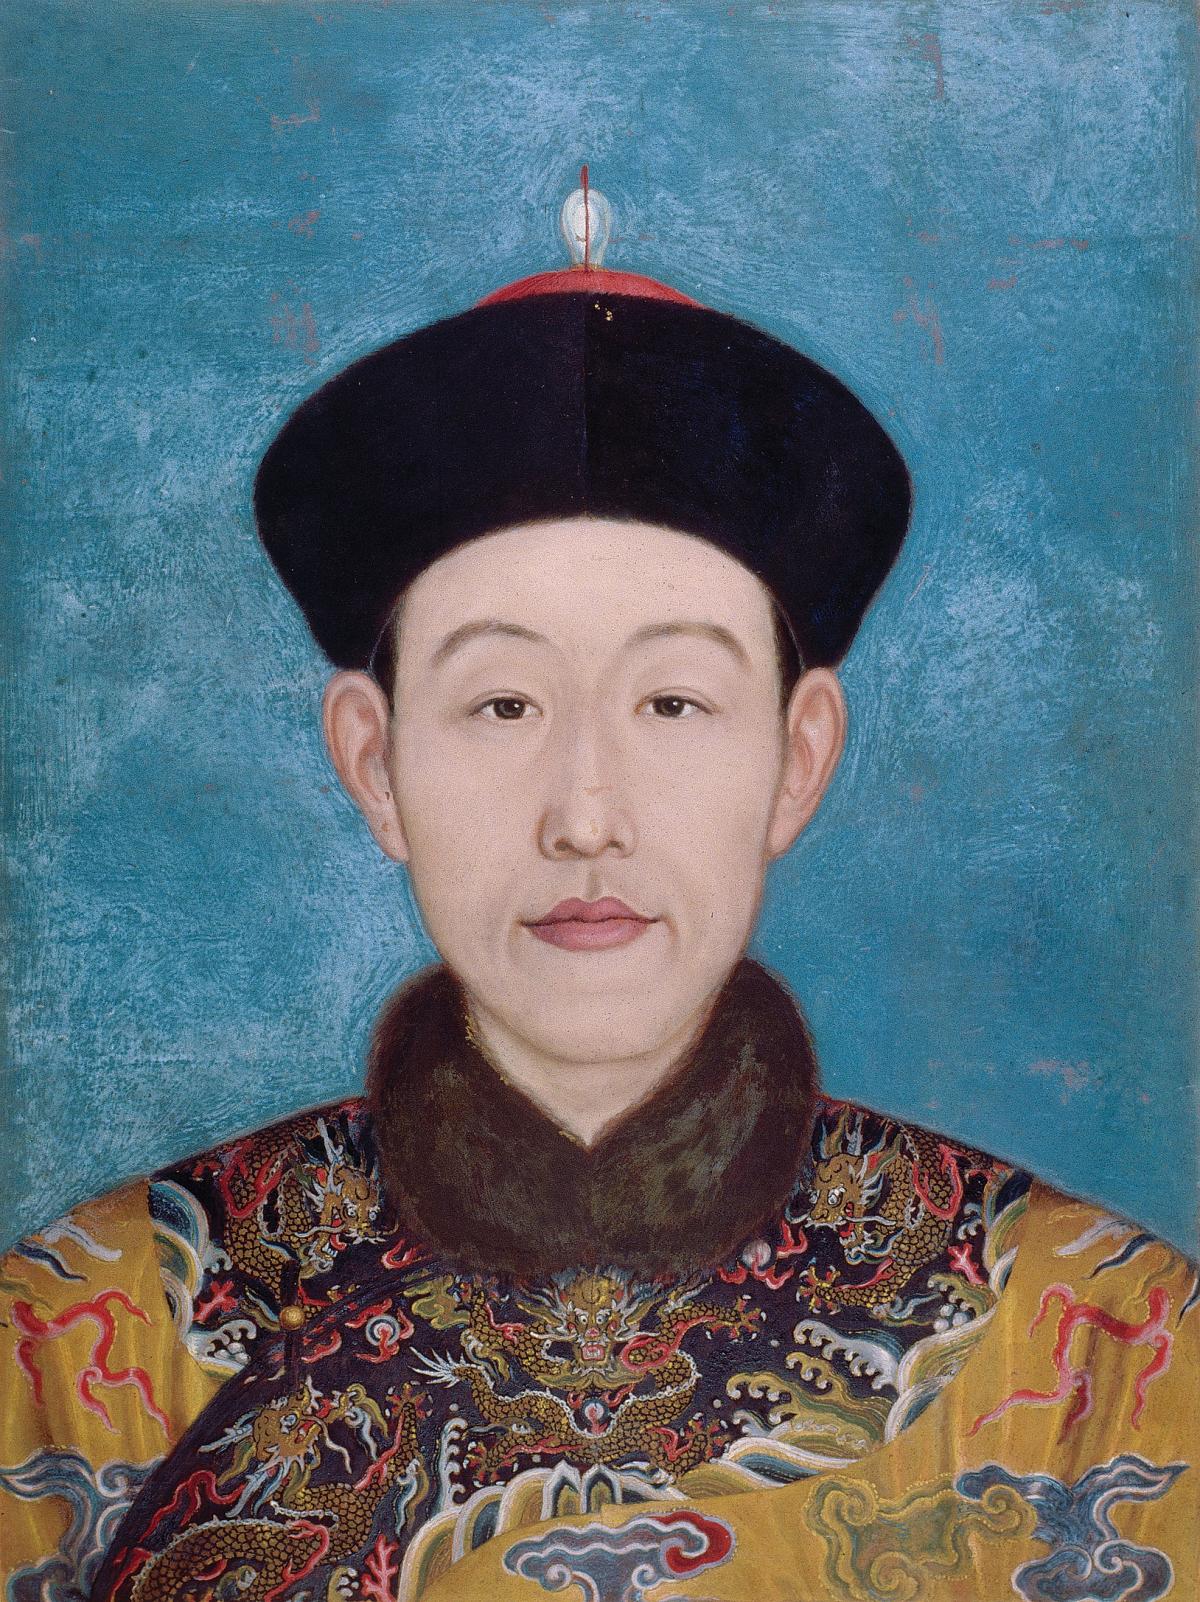 Head and shoulders portrait of the emperor, wearing a rounded black cap, brown fur collar, embroidered coat